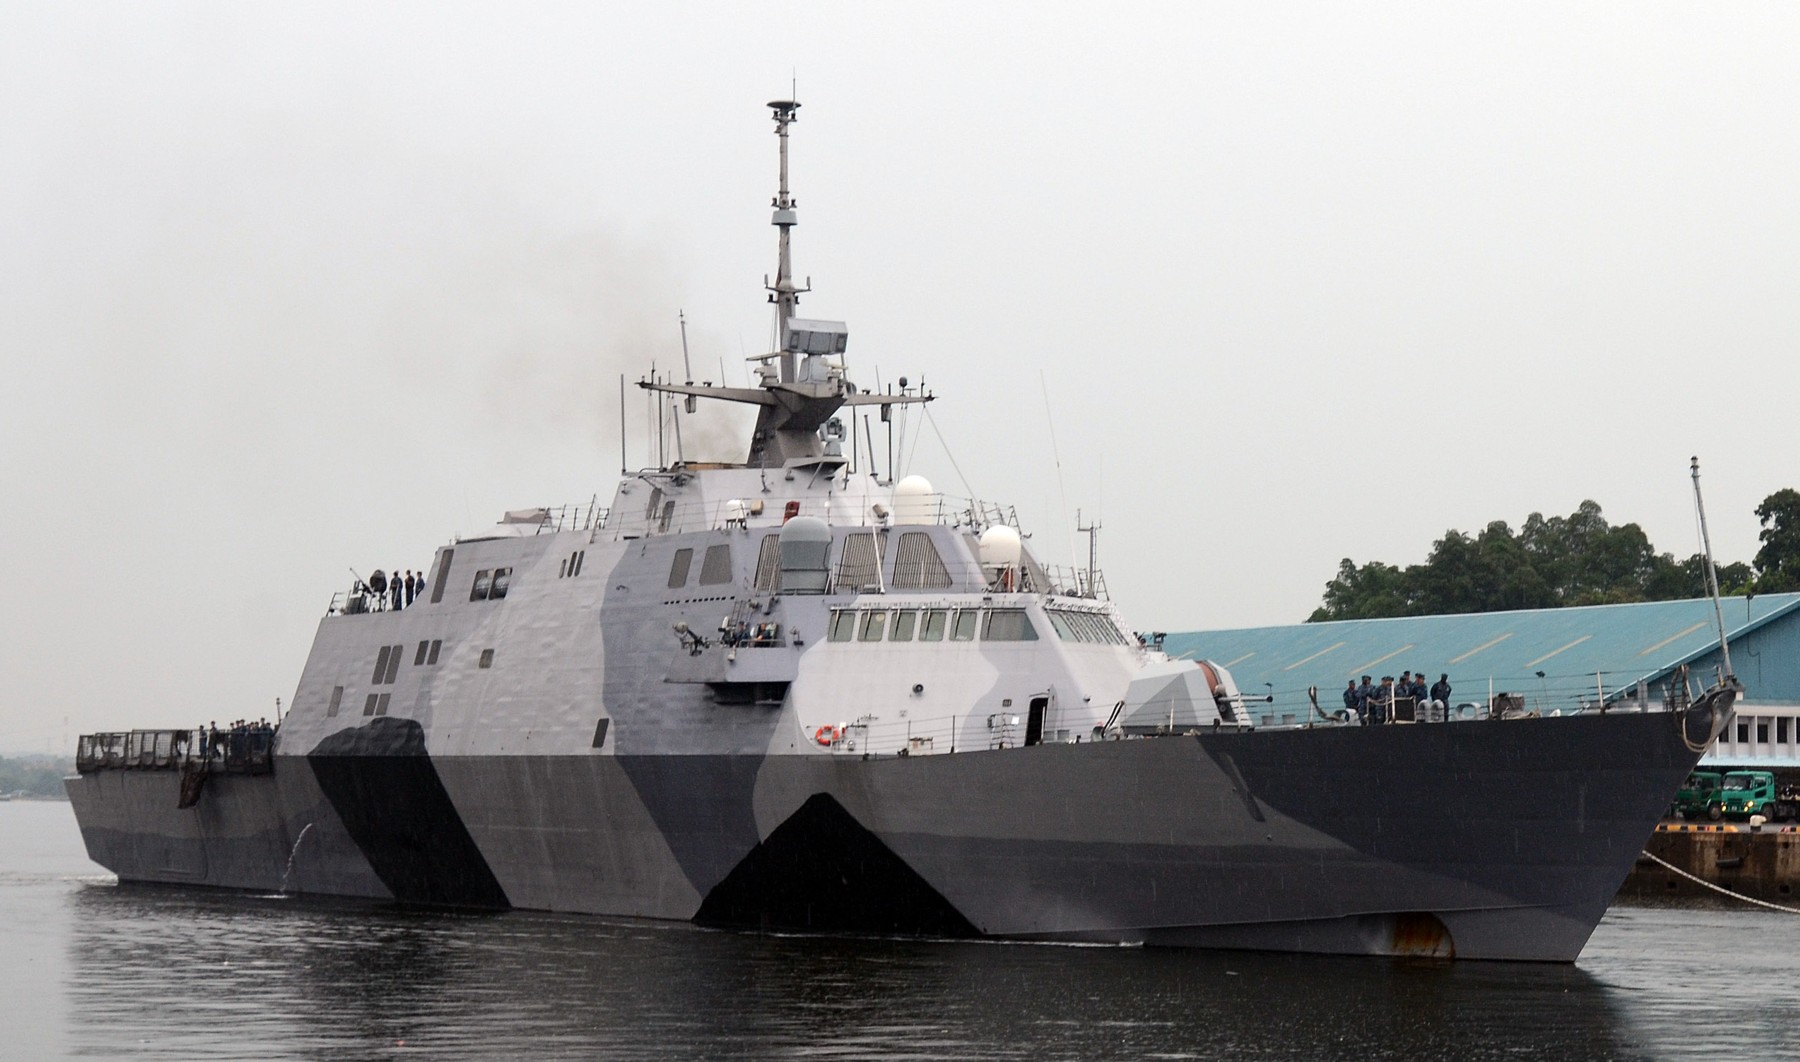 lcs-1 uss freedom class littoral combat ship us navy 27